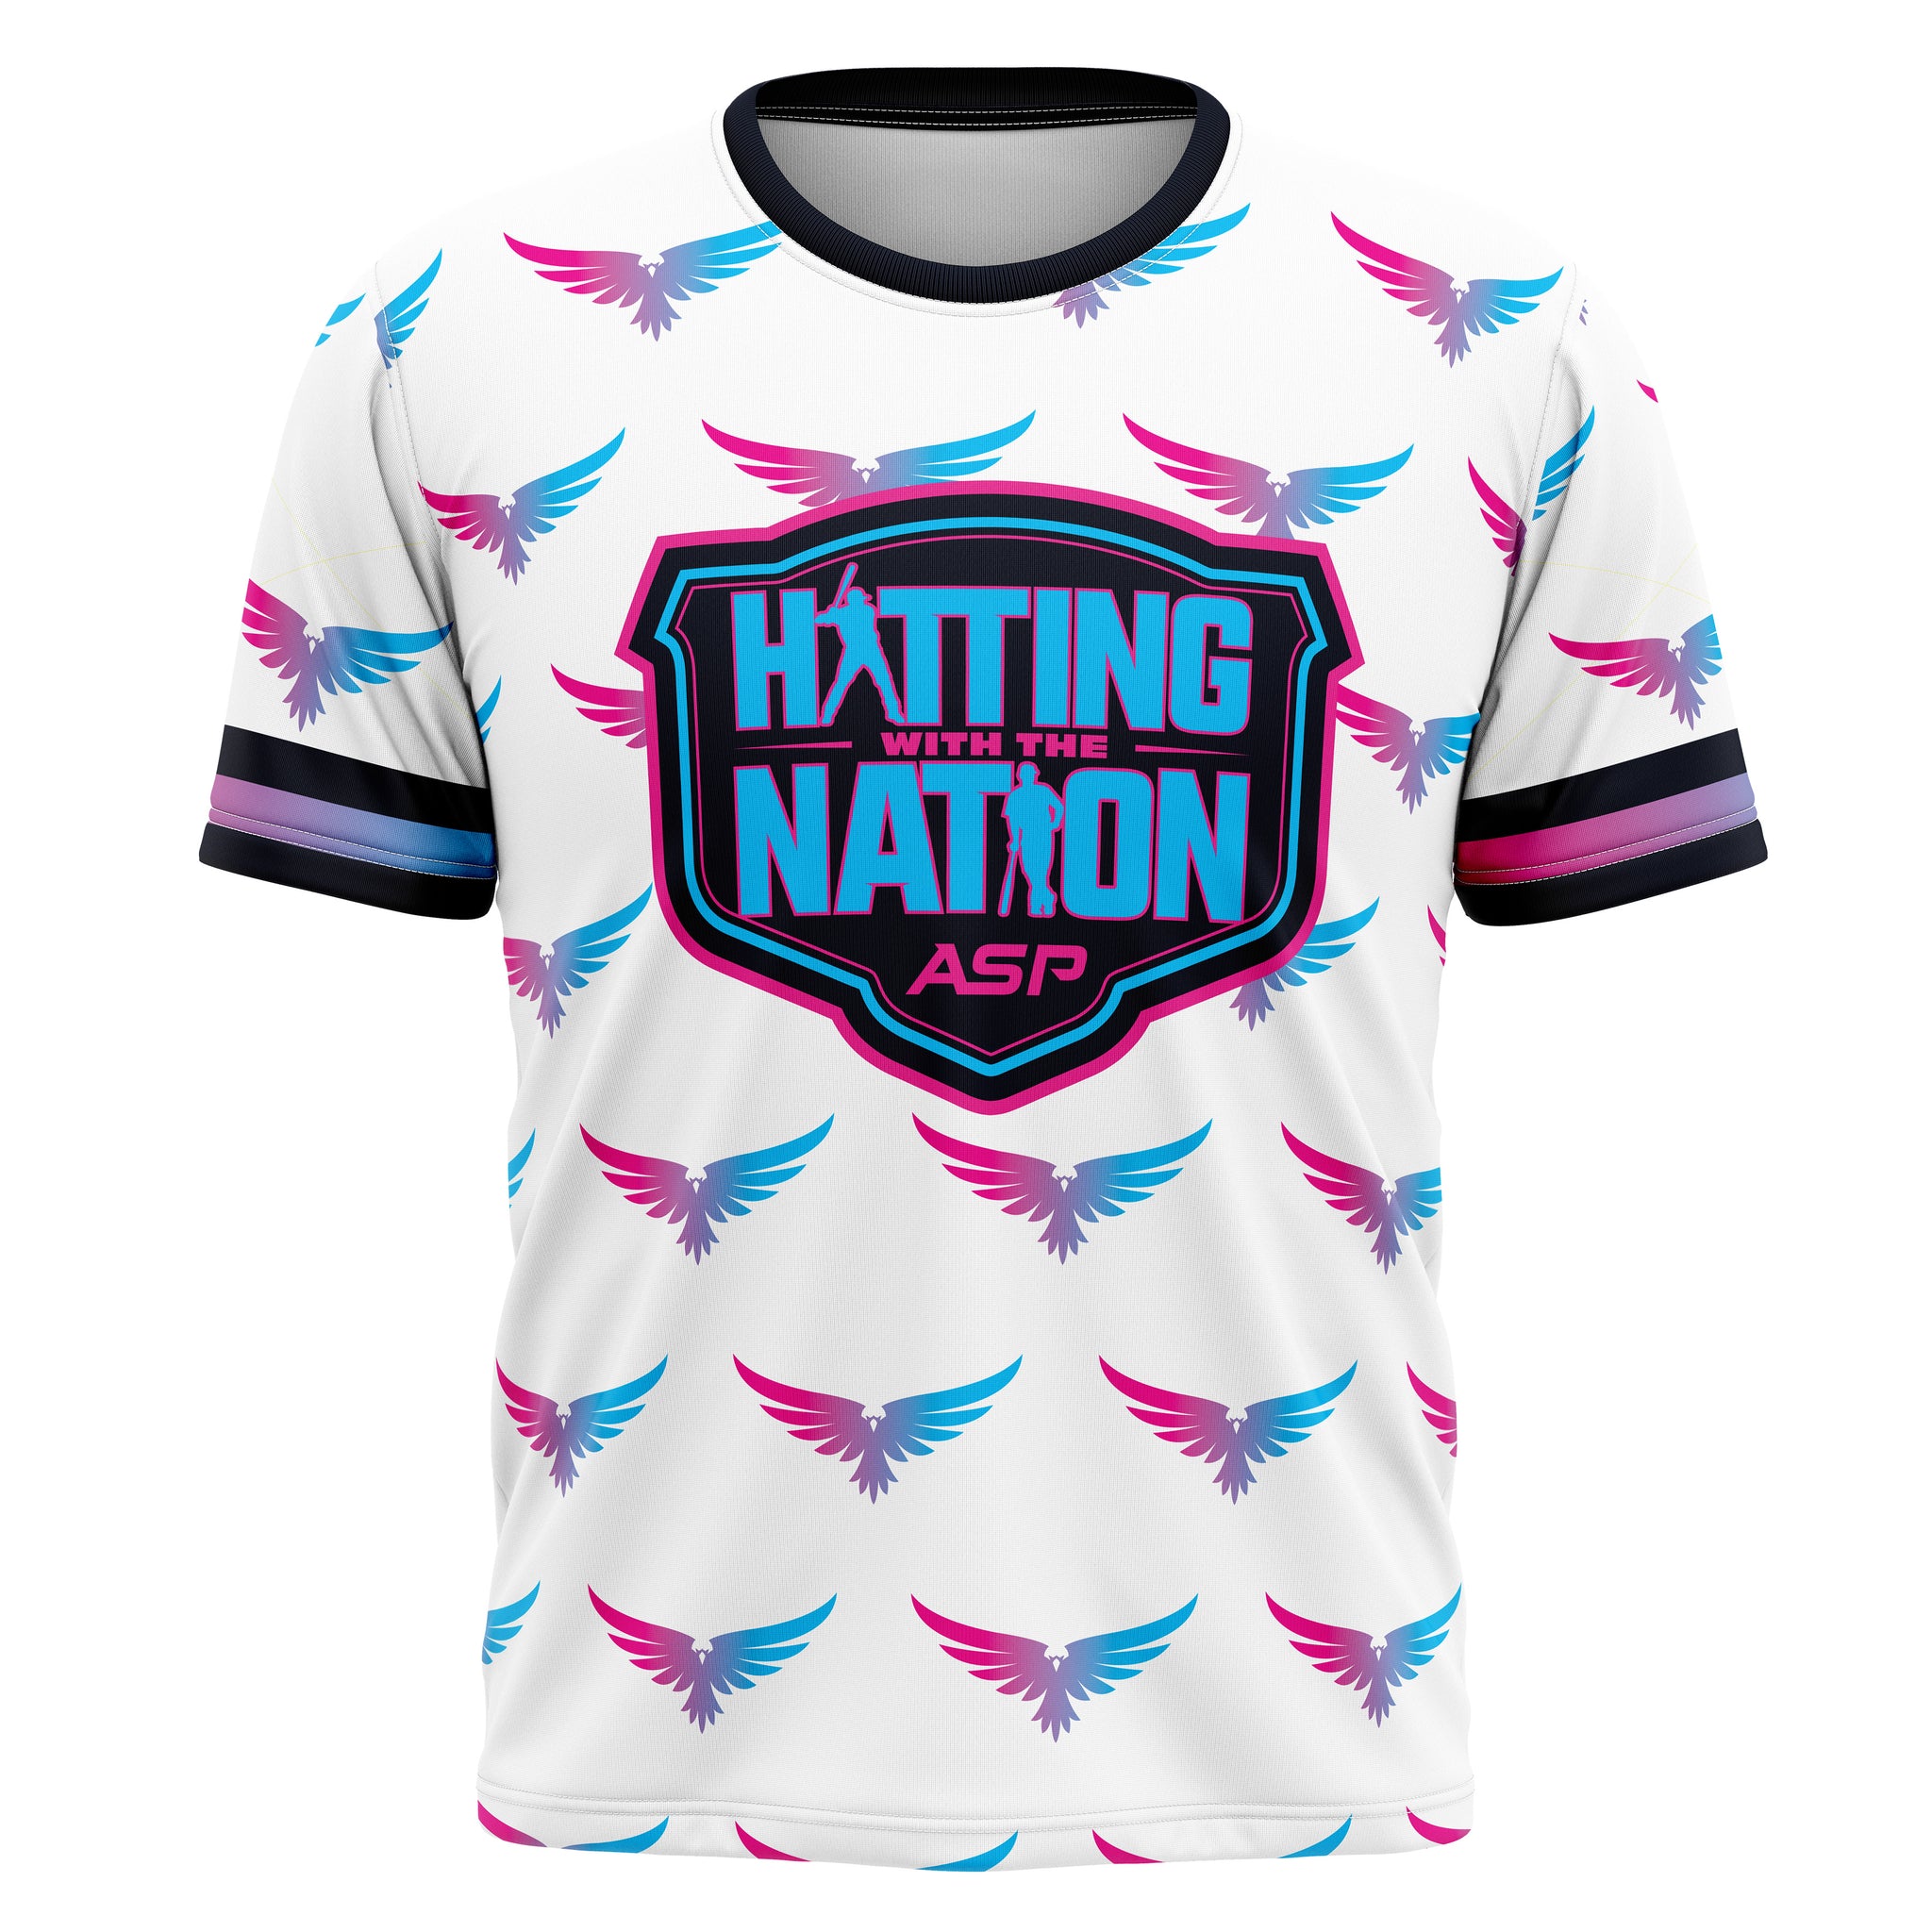 ASP Hitting with the Nation Short Sleeve